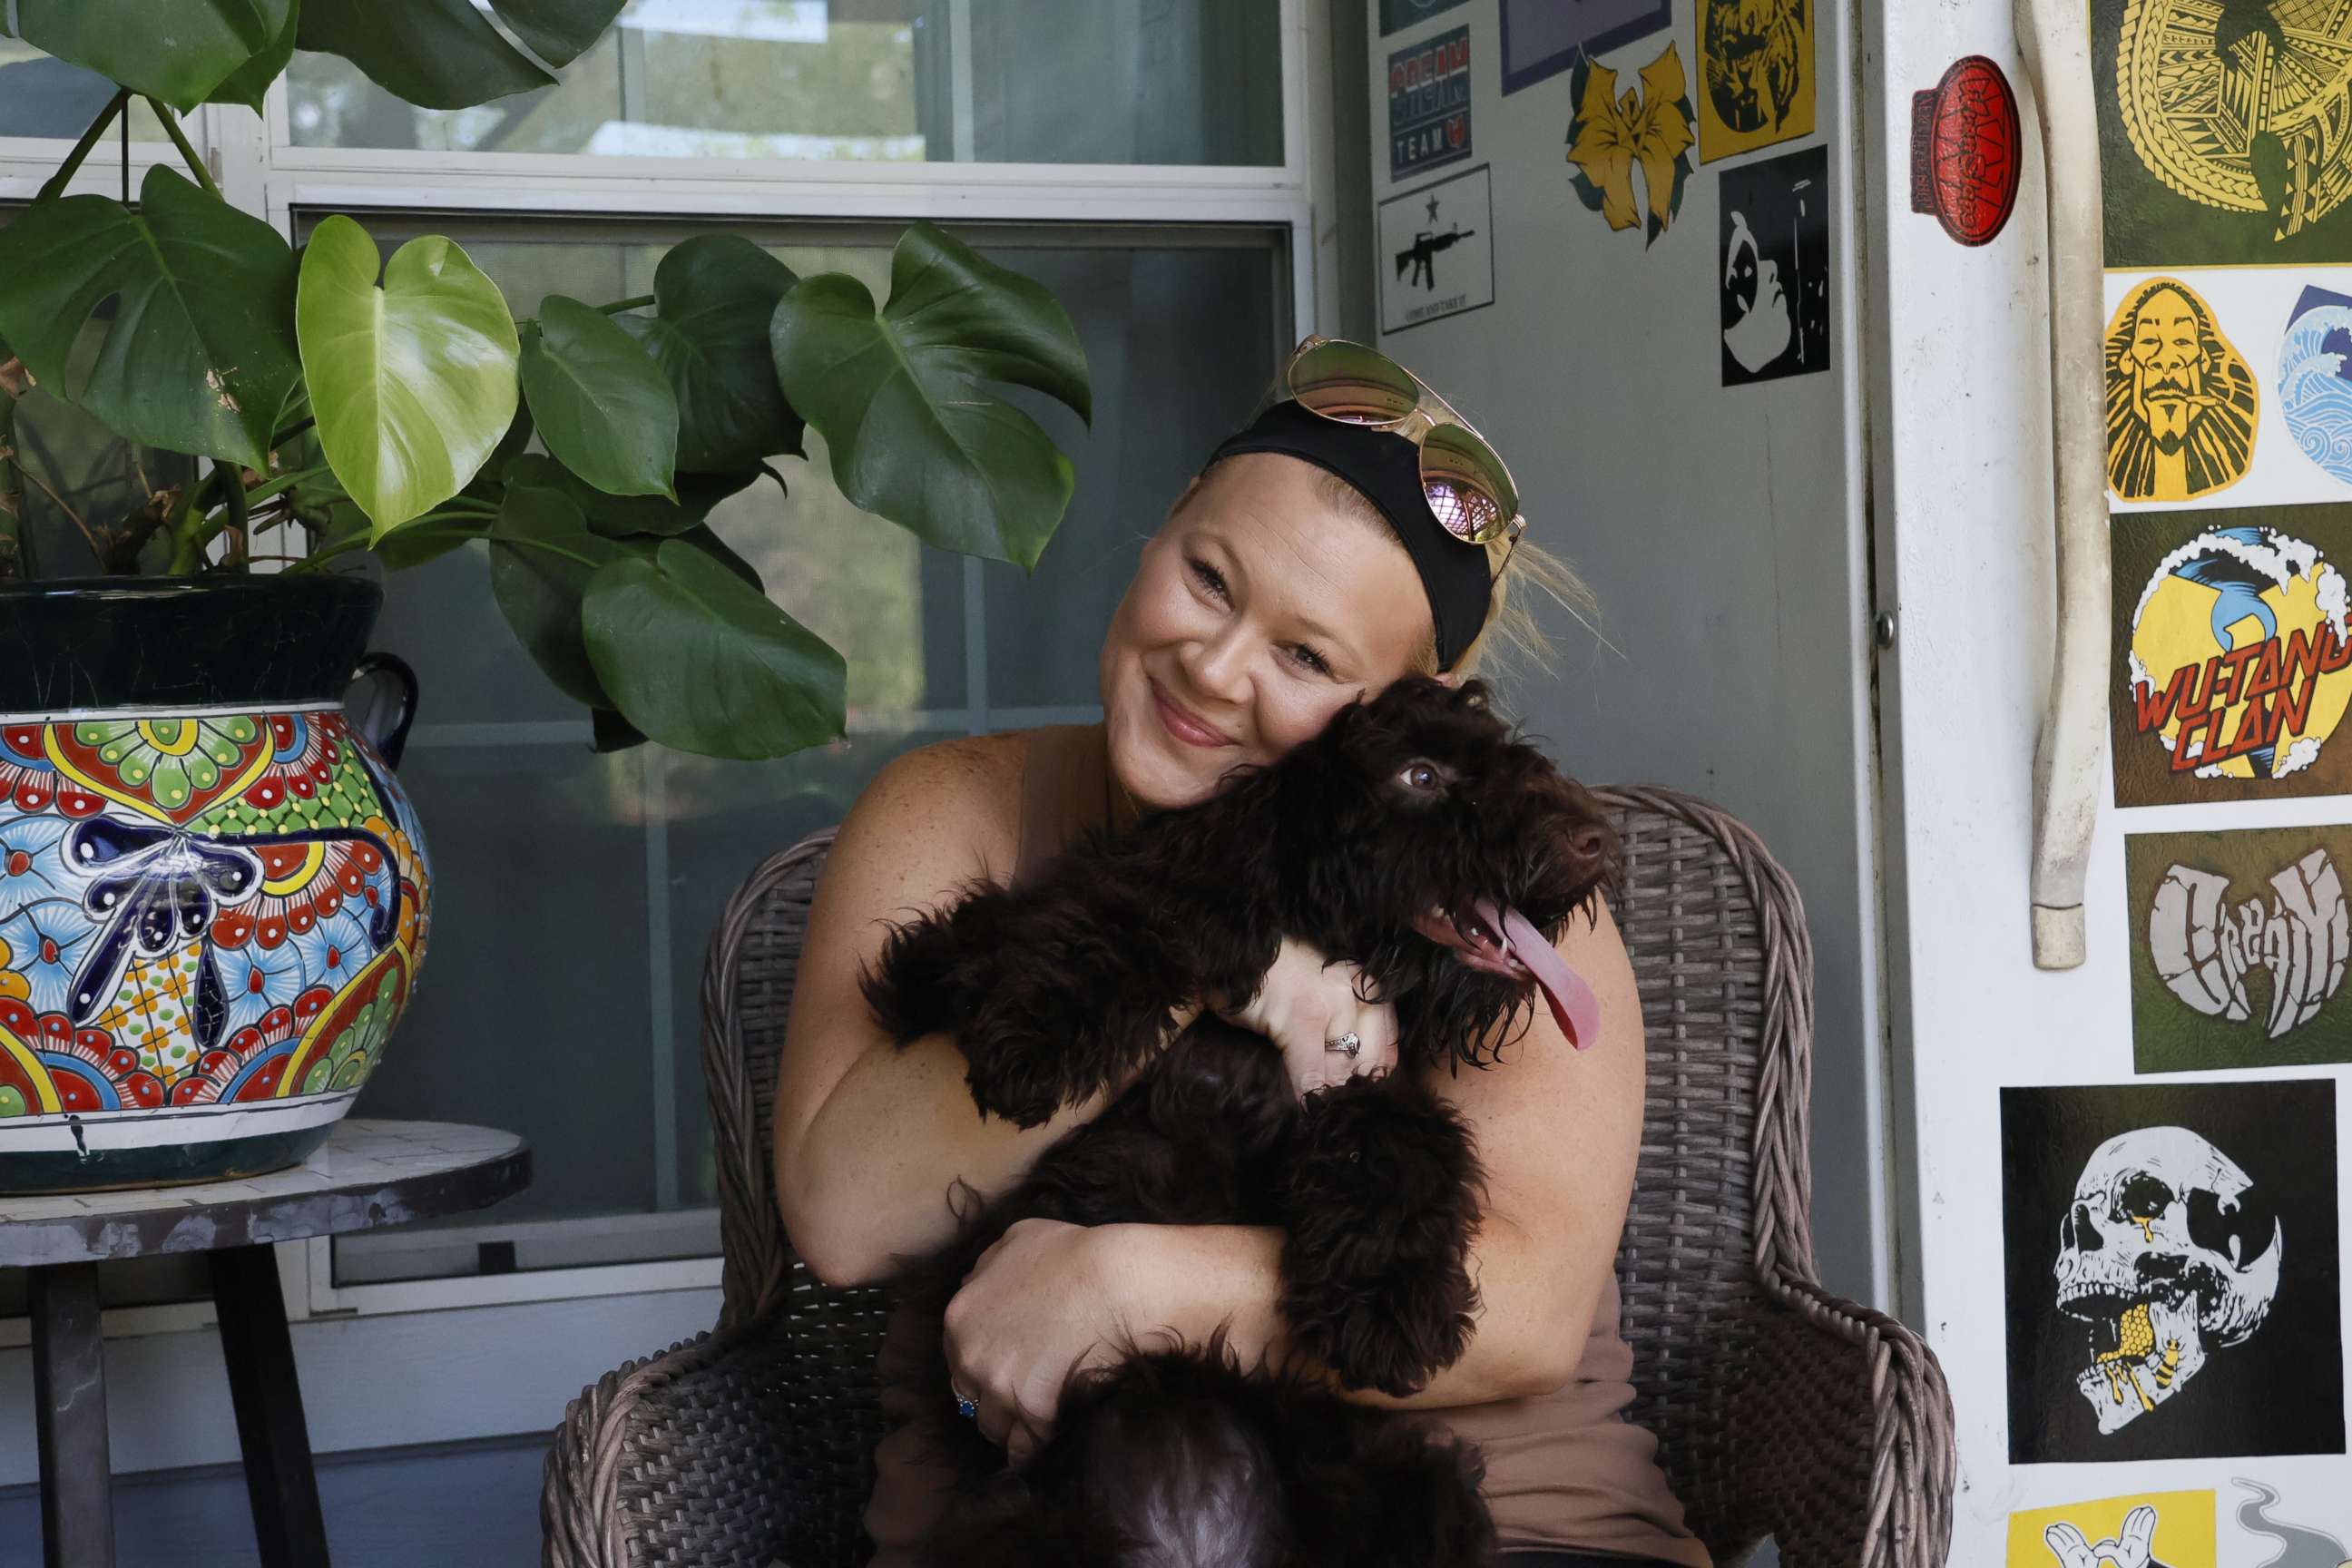 PHOTO: Khloie's mom, Jamie, holds Khloie's dog, Brownie, at a family members house on Sept. 25, 2022.